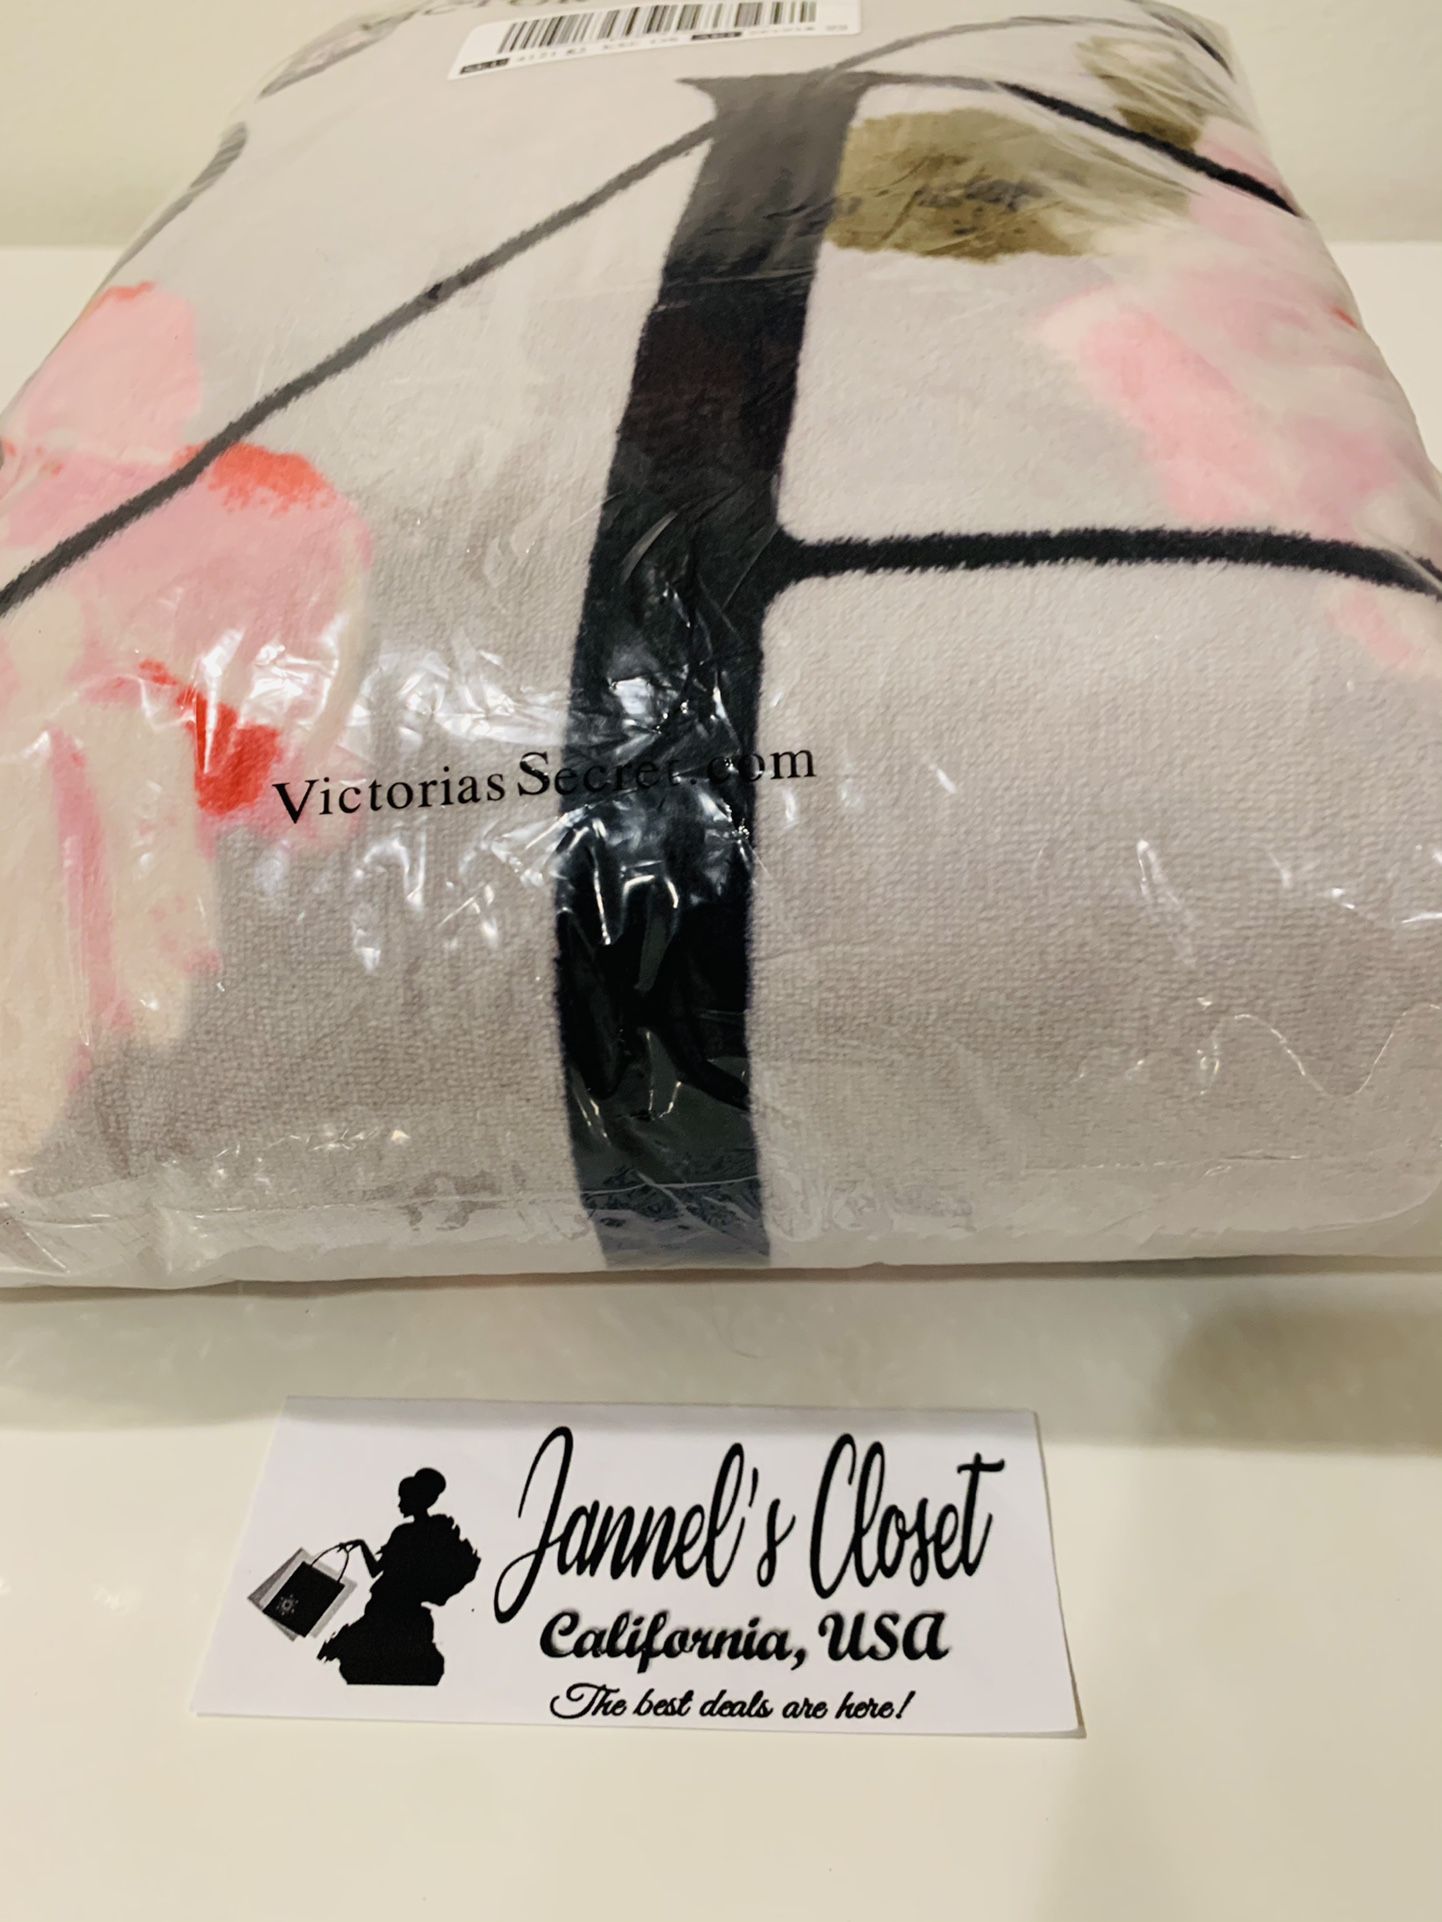 Victoria’s Secret Pink Love Floral Sherpa Blanket Plush Cozy Throw Blanket Holiday 2020. New in bag “50” X 60” I can bundle my items so you can save